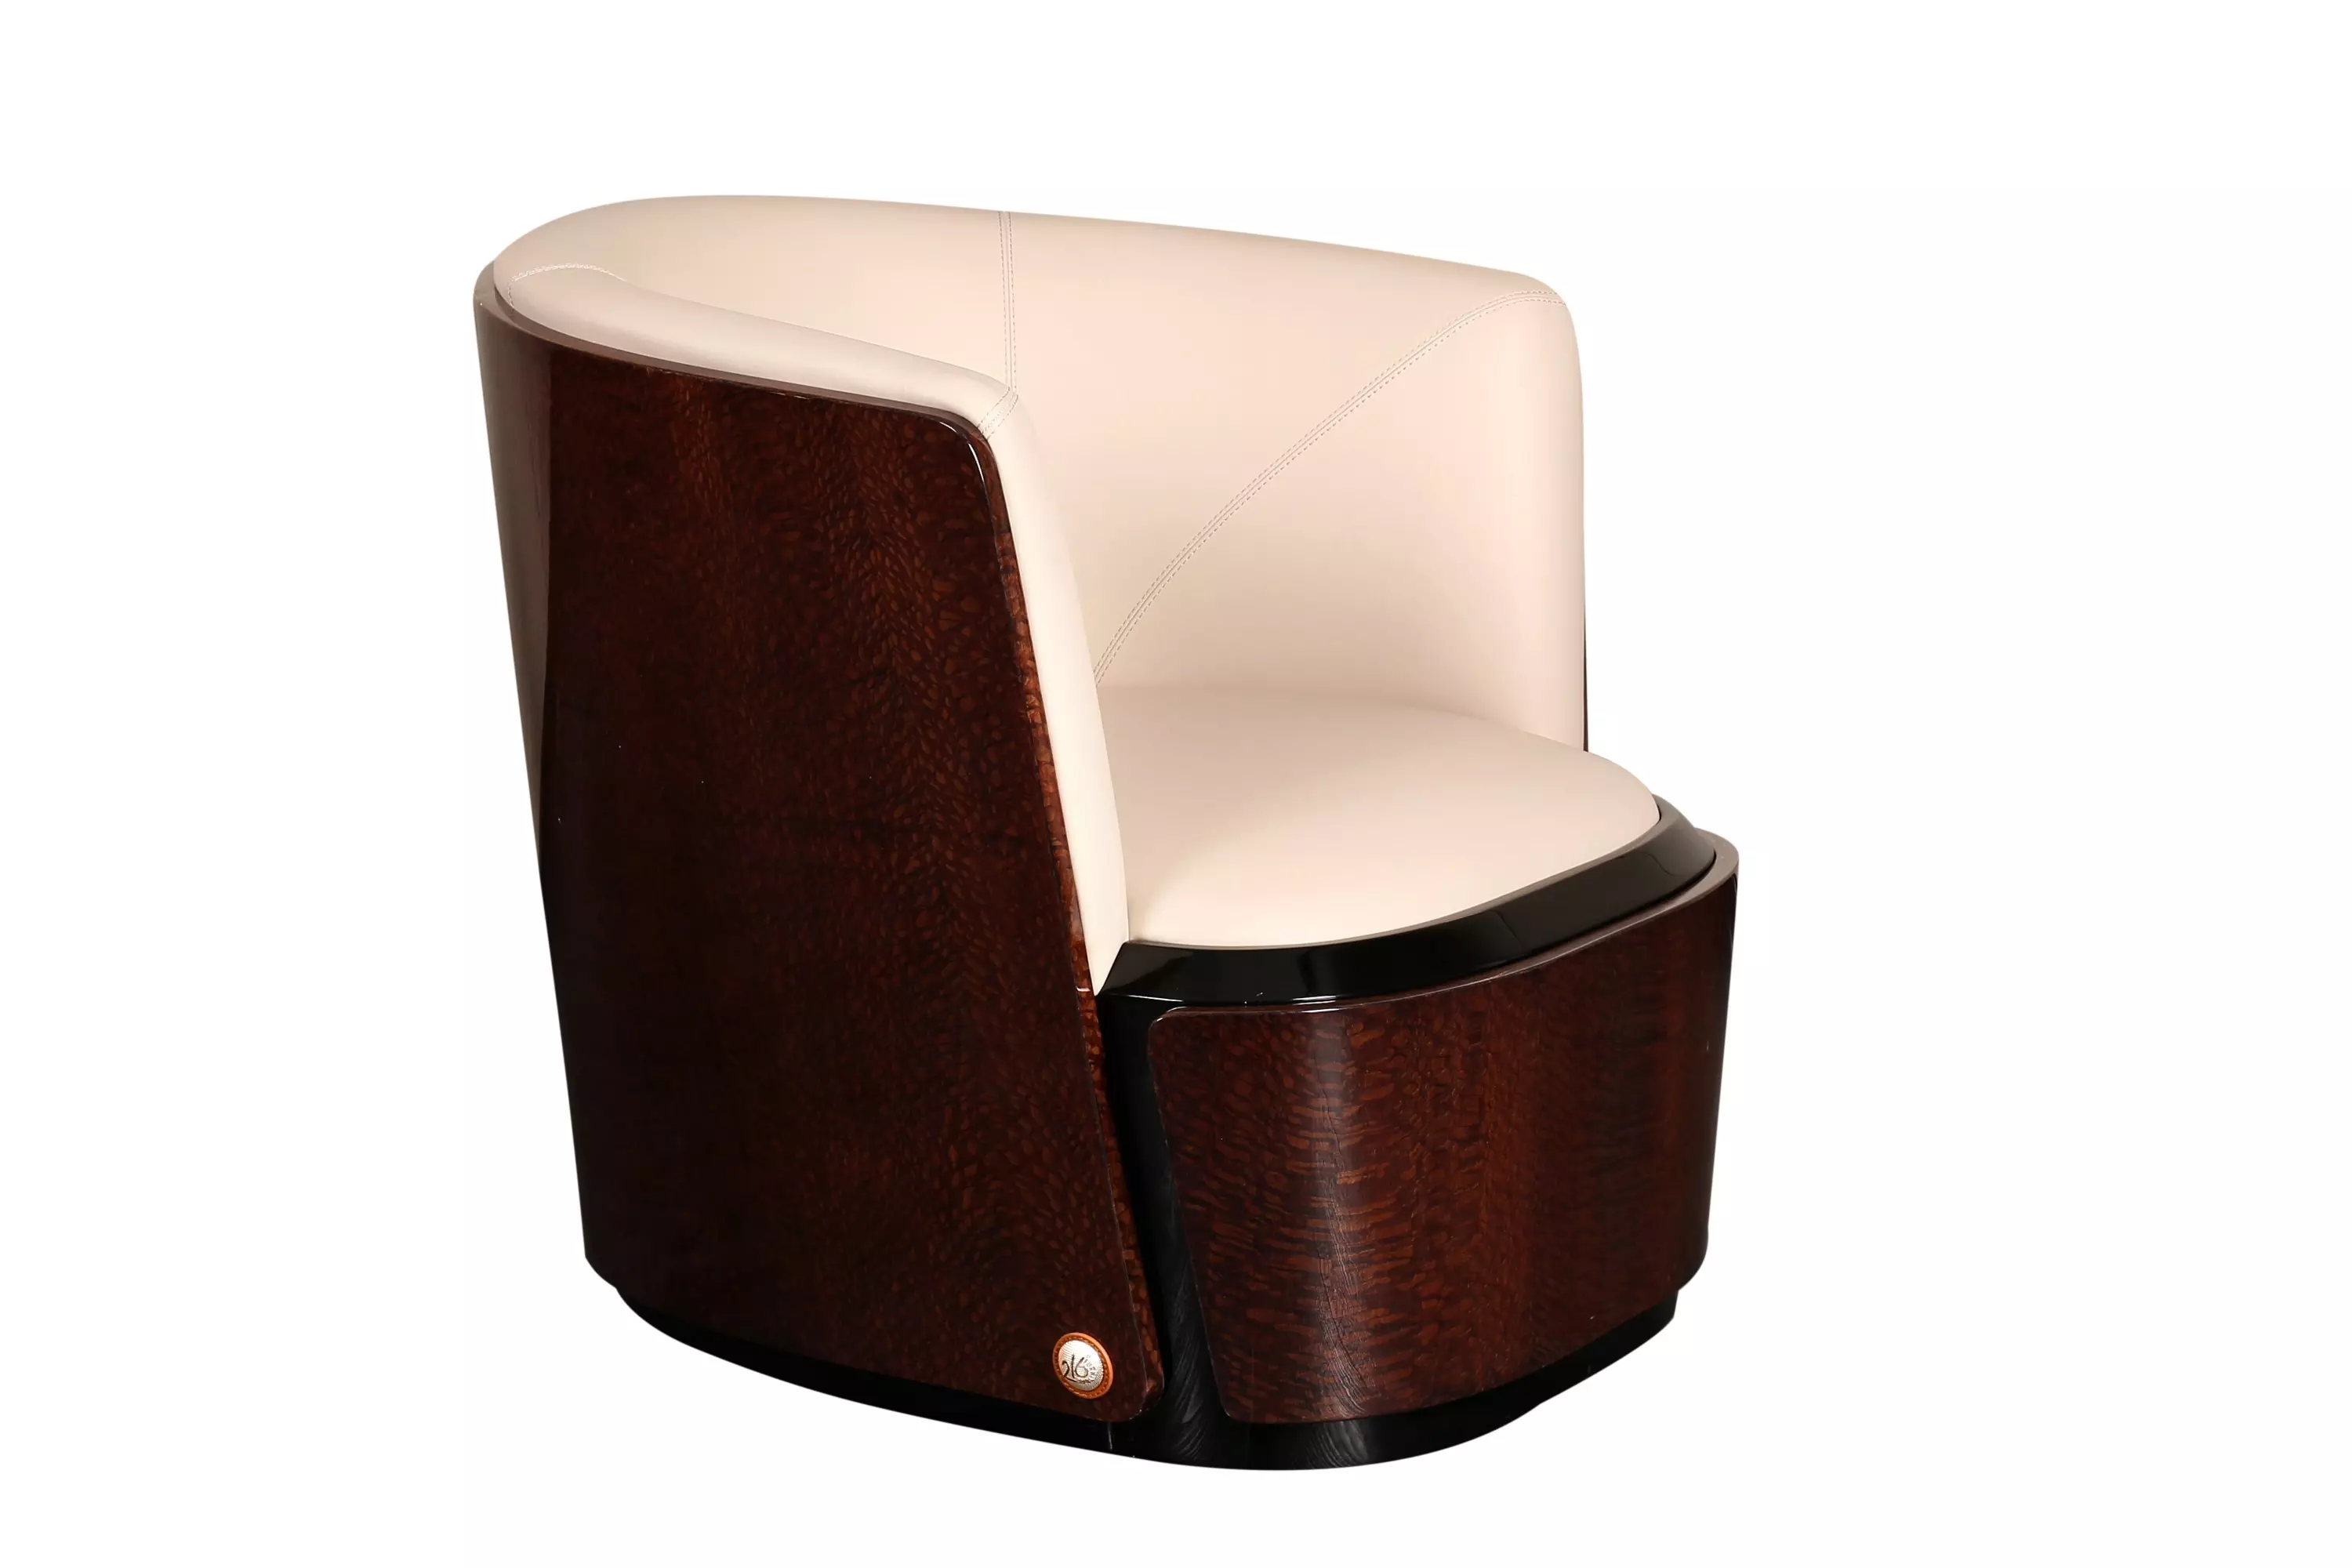 GIO Seating Group will enchant your guests with its comfort and stylish details